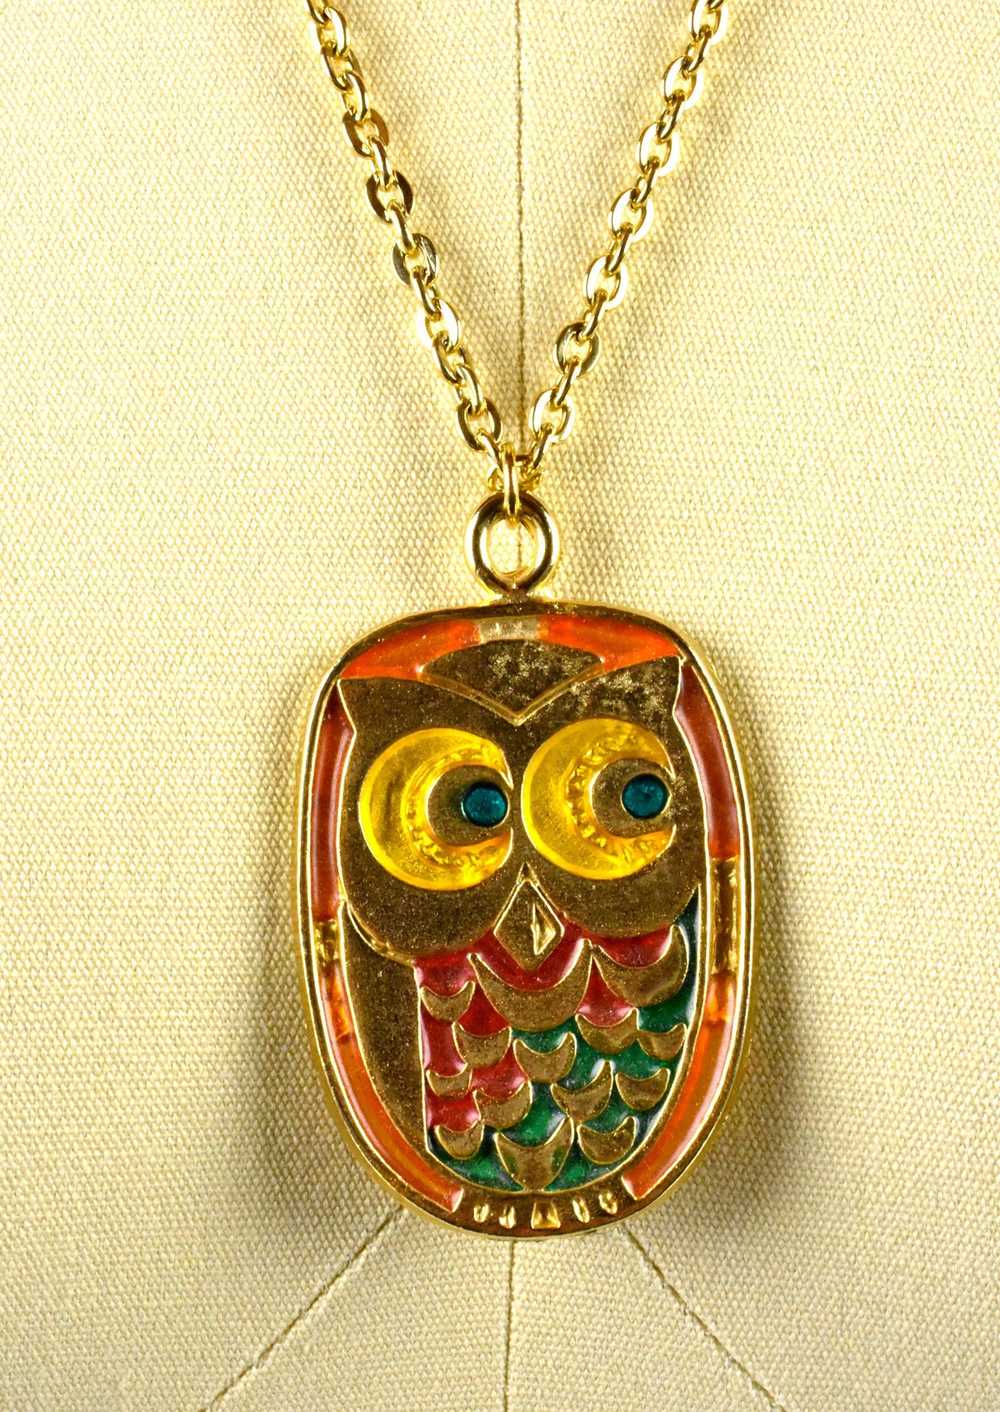 1970's Quirky Owl Pendant on Chain - image 2